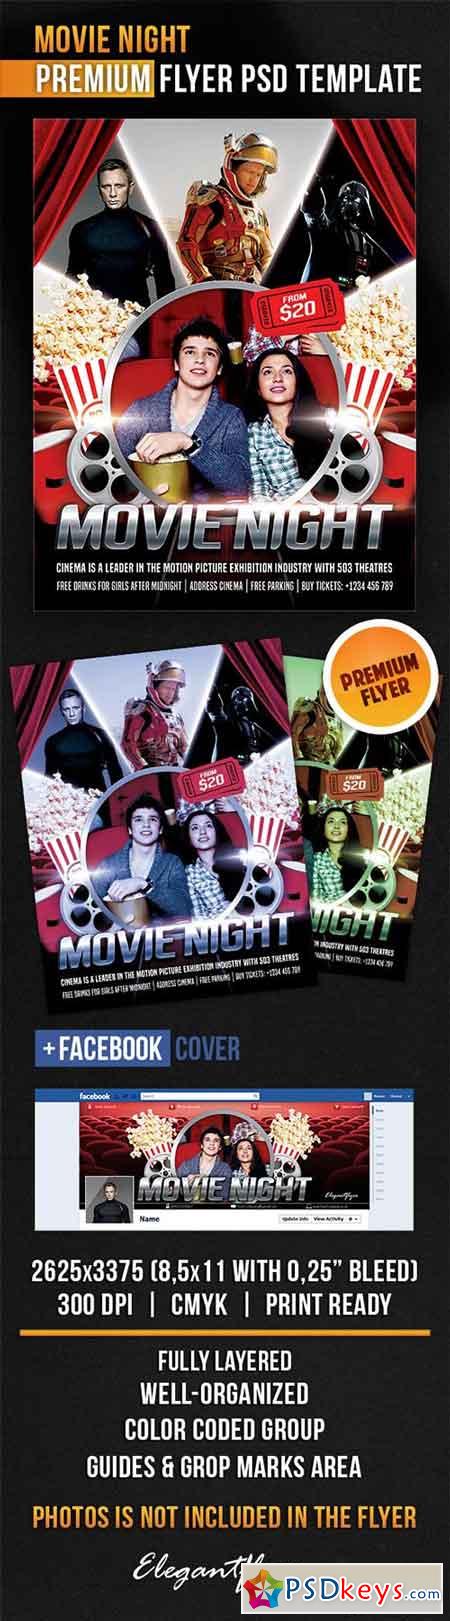 Movie Night Flyer PSD Template + Facebook Cover 4